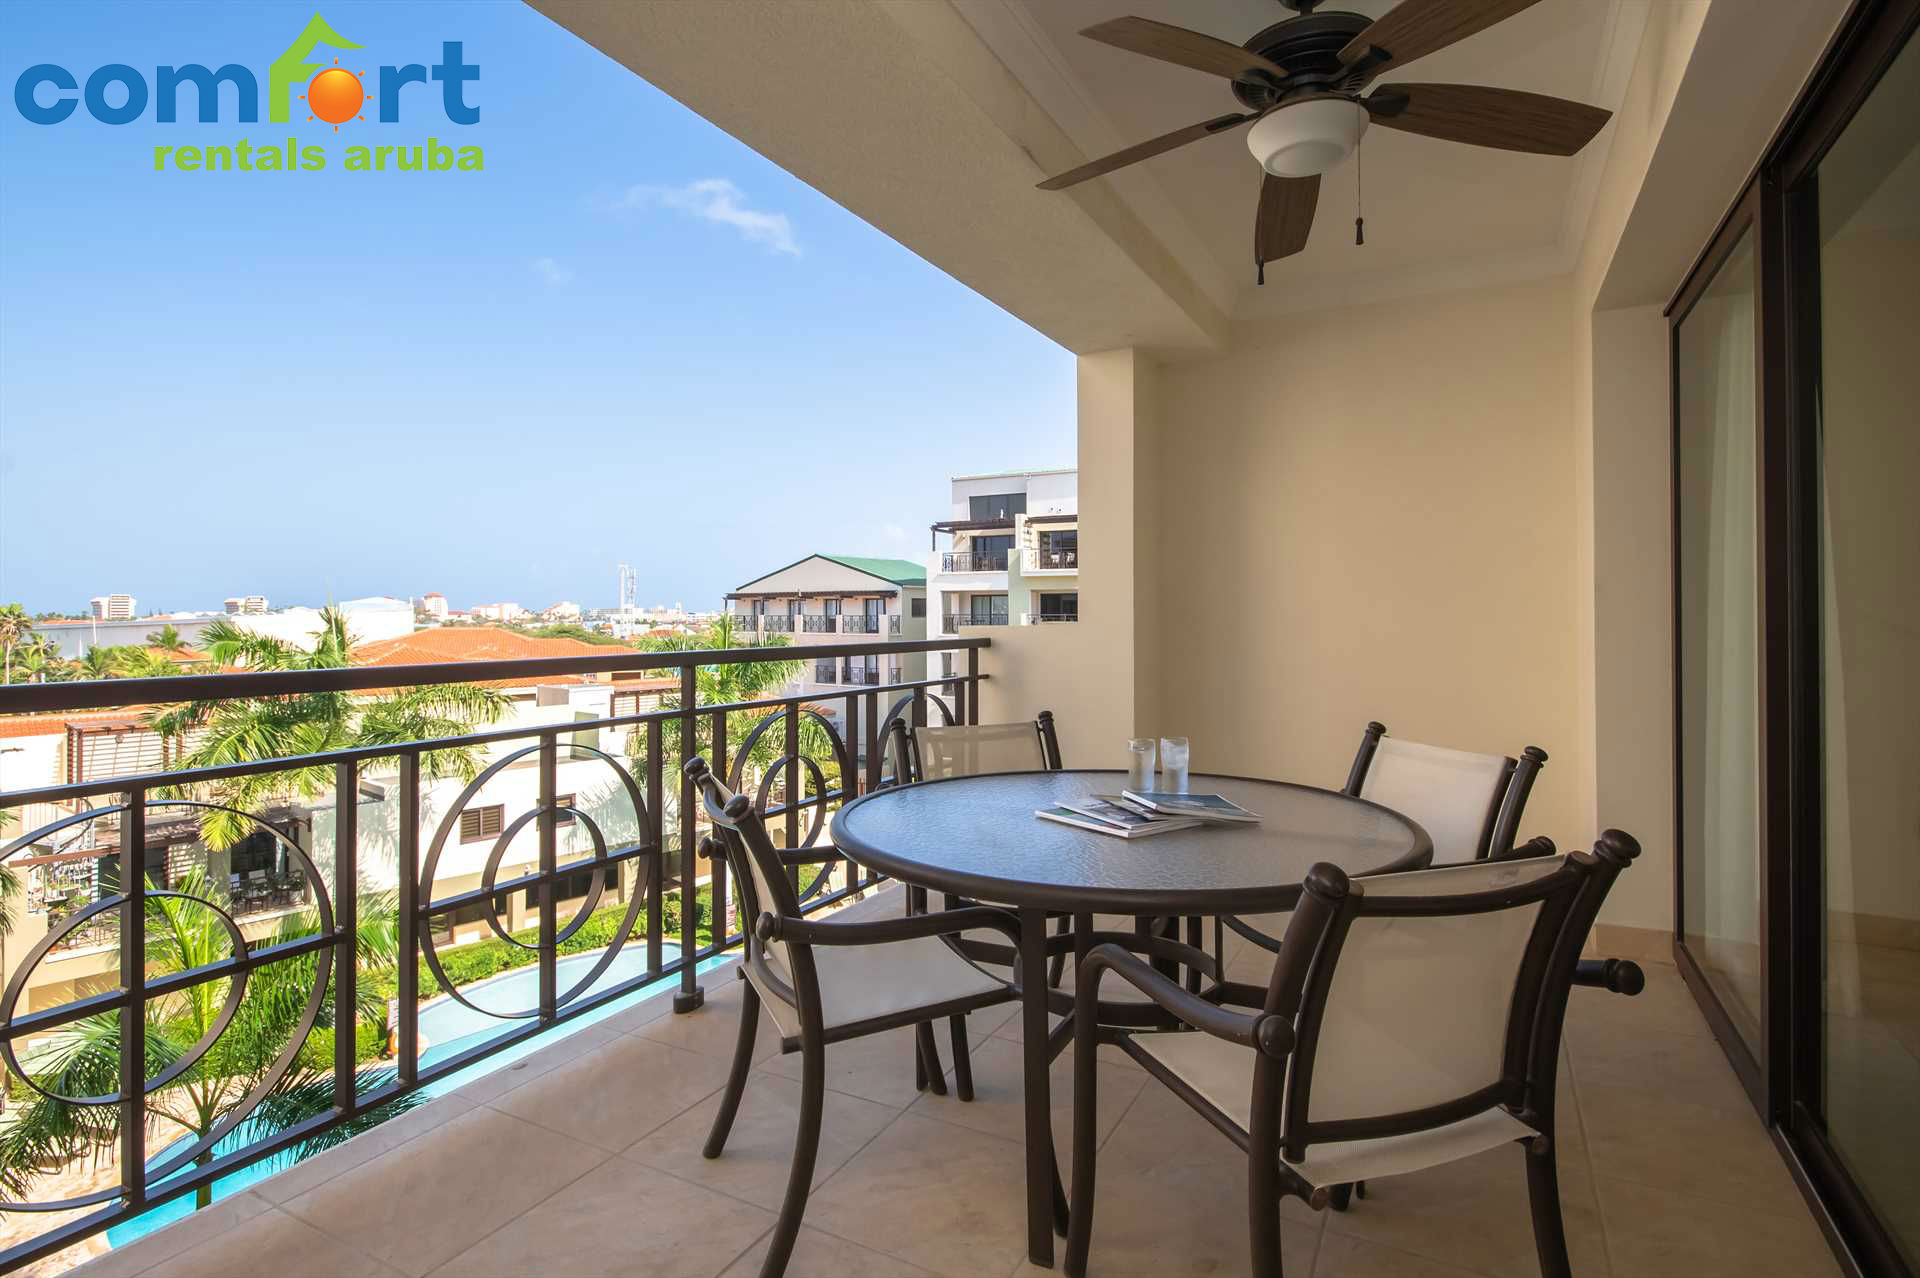 The balcony makes for the perfect setting to enjoy Aruba's weather